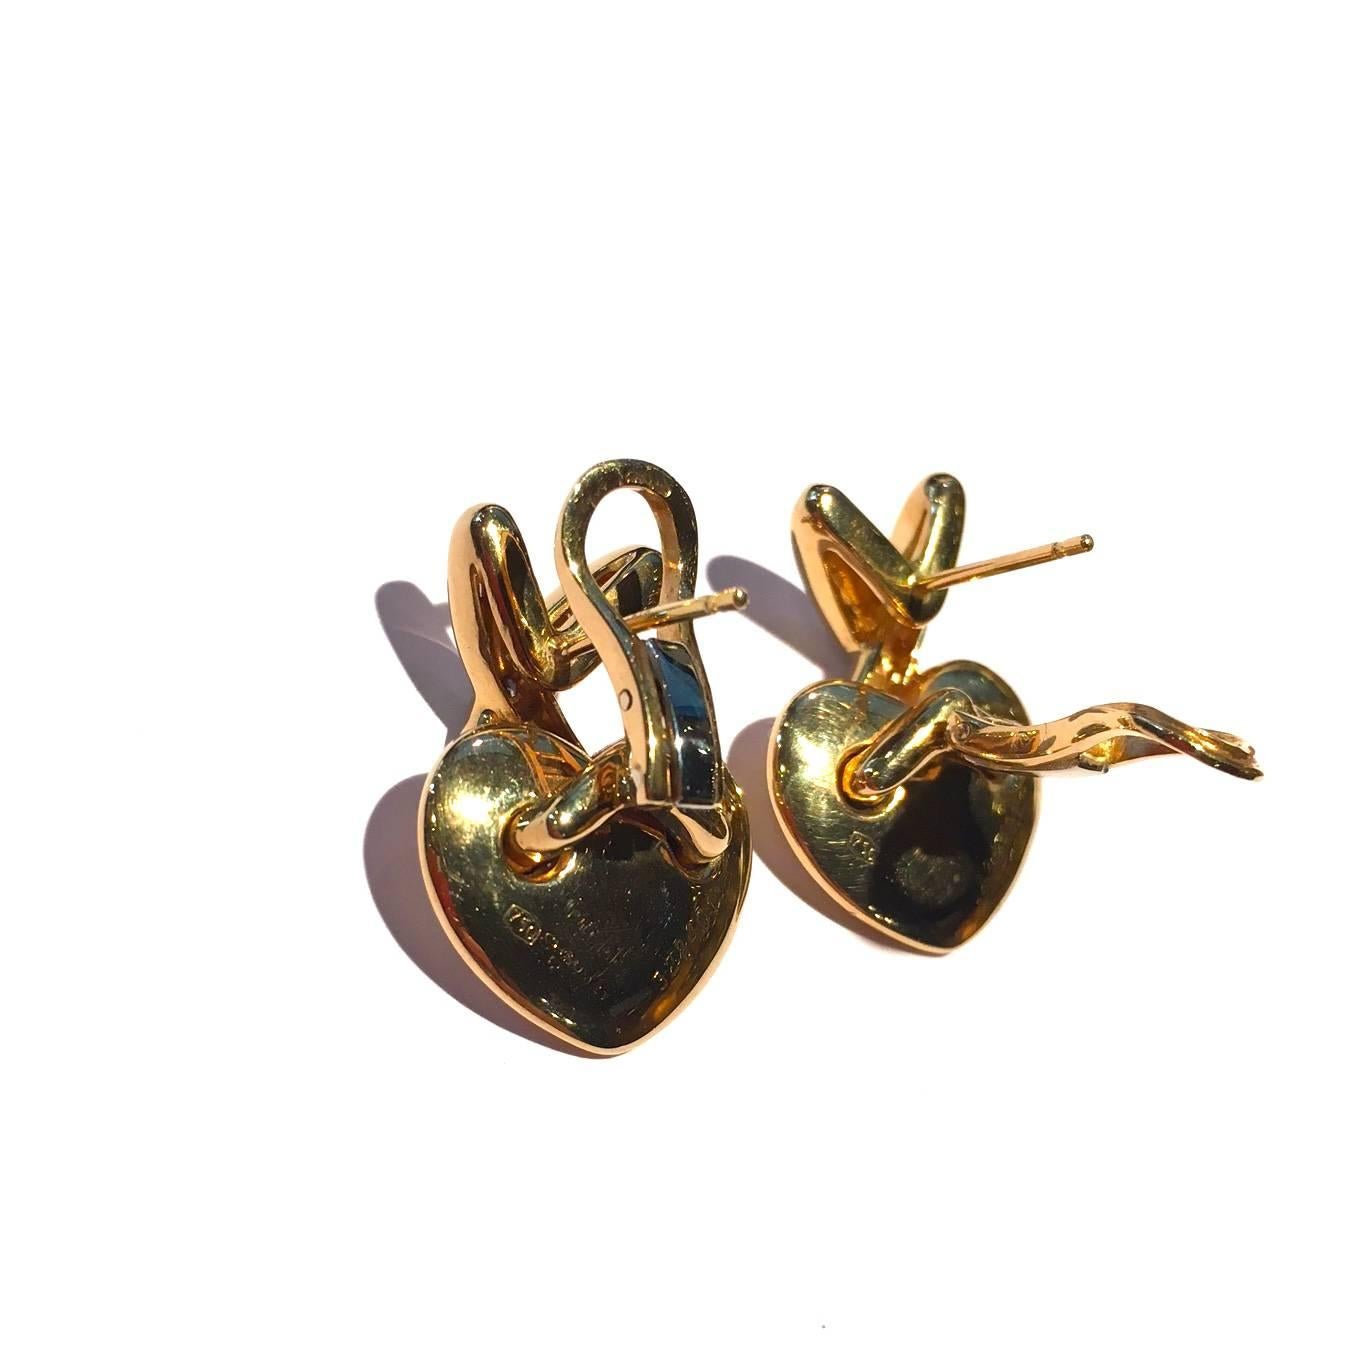 CHAUMET Earrings Heart Model "Lien" in yellow gols and diamonds. Signed and Numbered.  Comes with Chaumet Case. (17,4 grs)